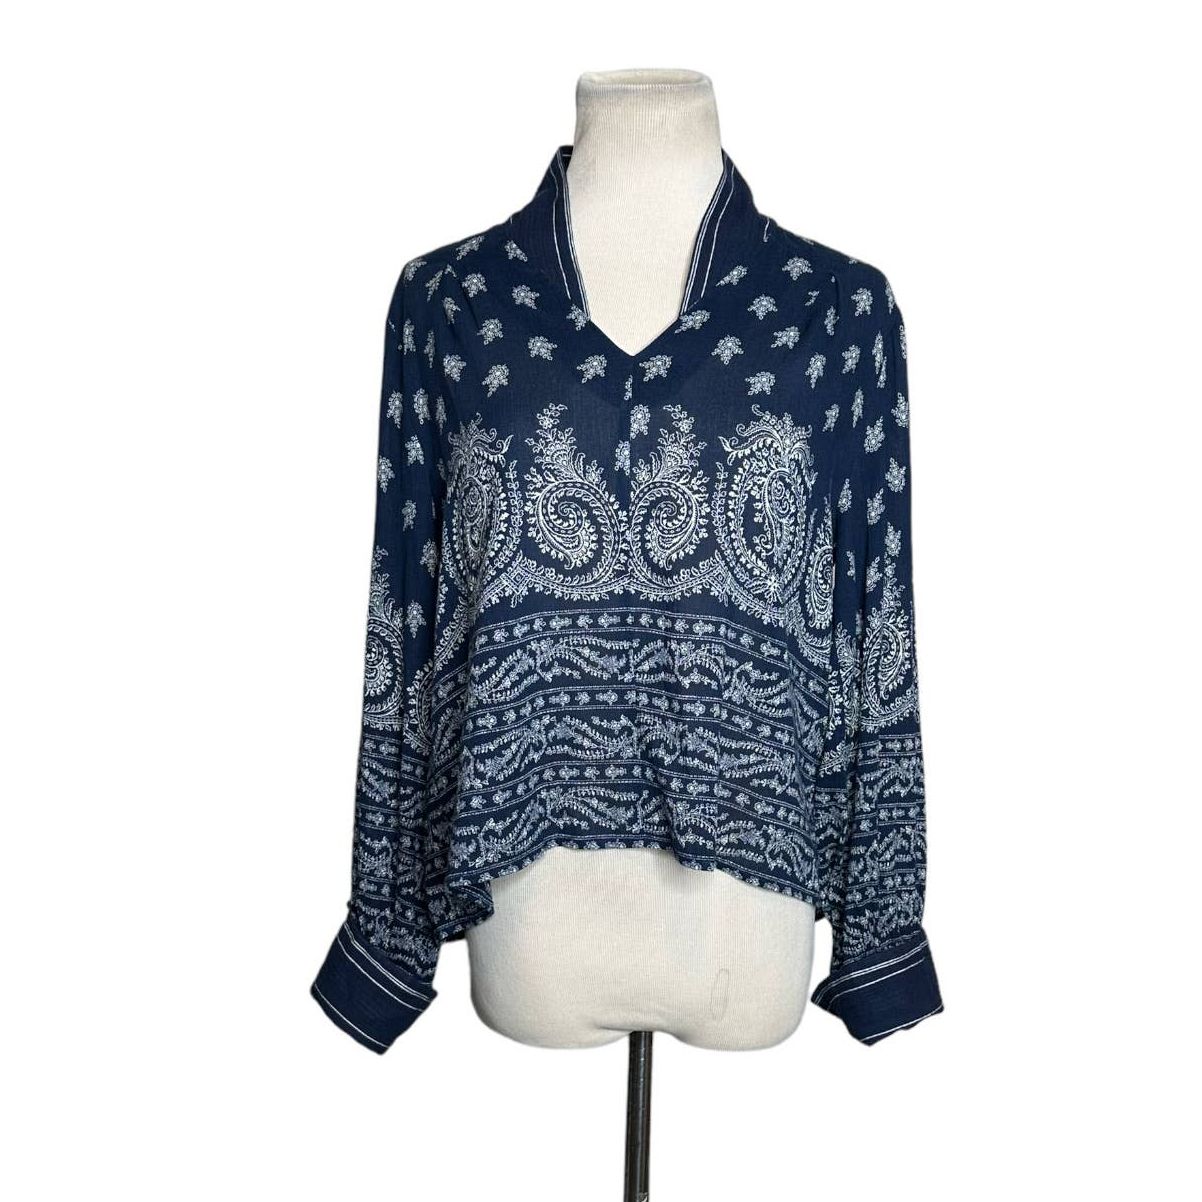 Sea New York Sea New York blue paisley print long sleeves blouse size 2 Size XS / US 0-2 / IT 36-38 - 1 Preview